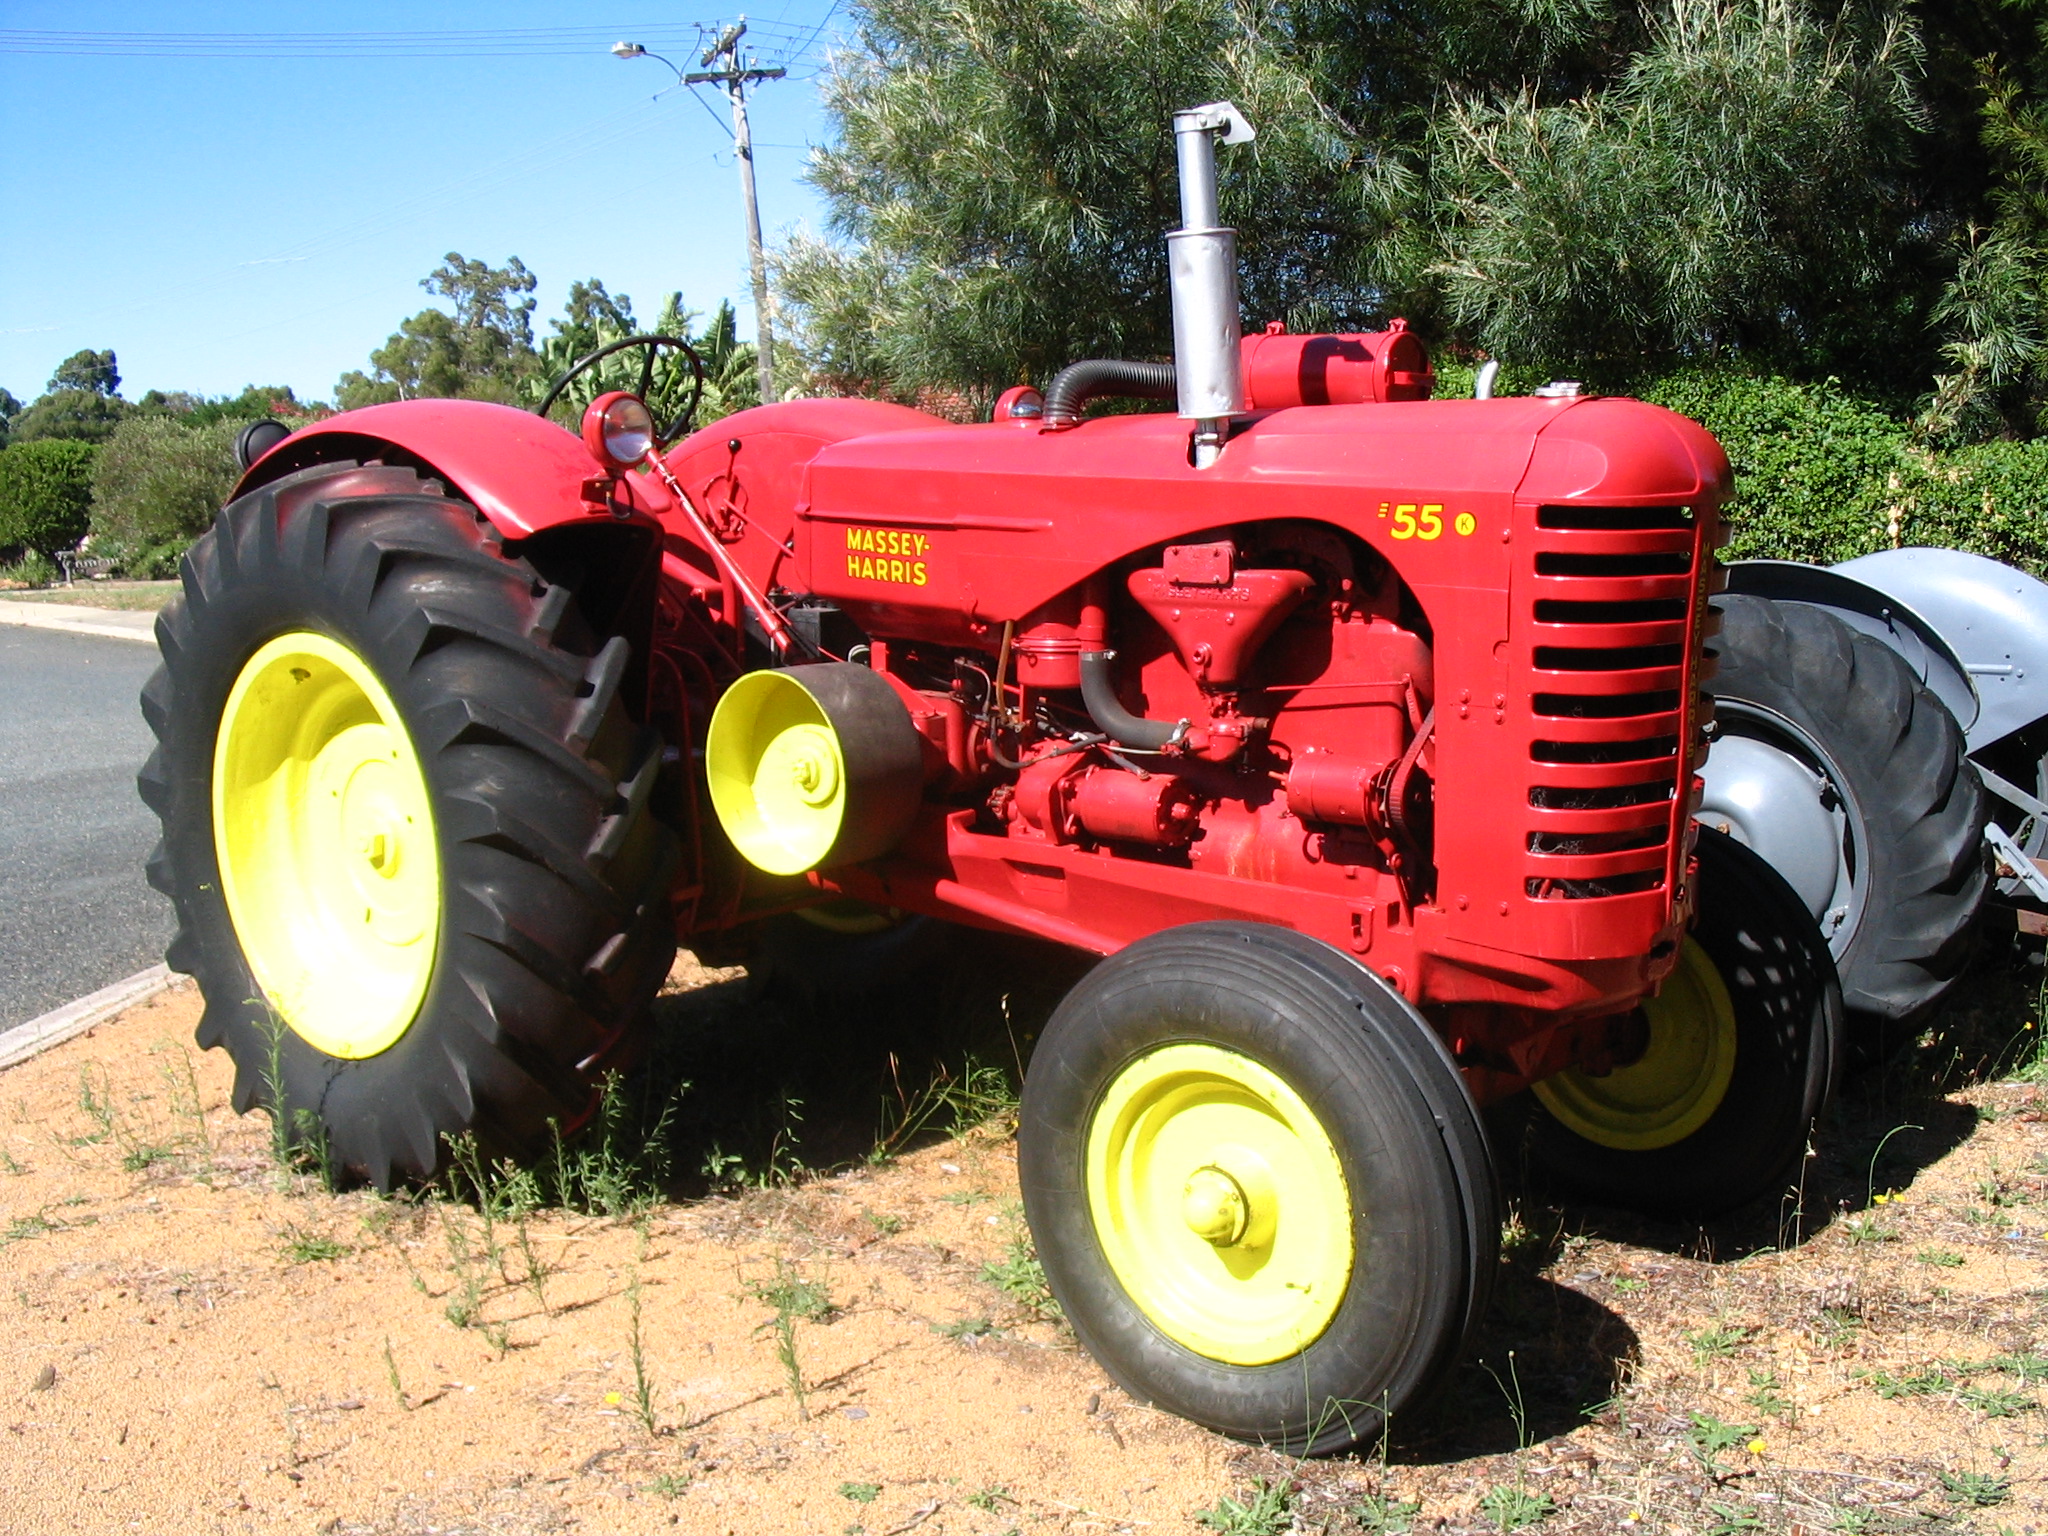 Massey Harris 55 owned by Willie Young of Australia